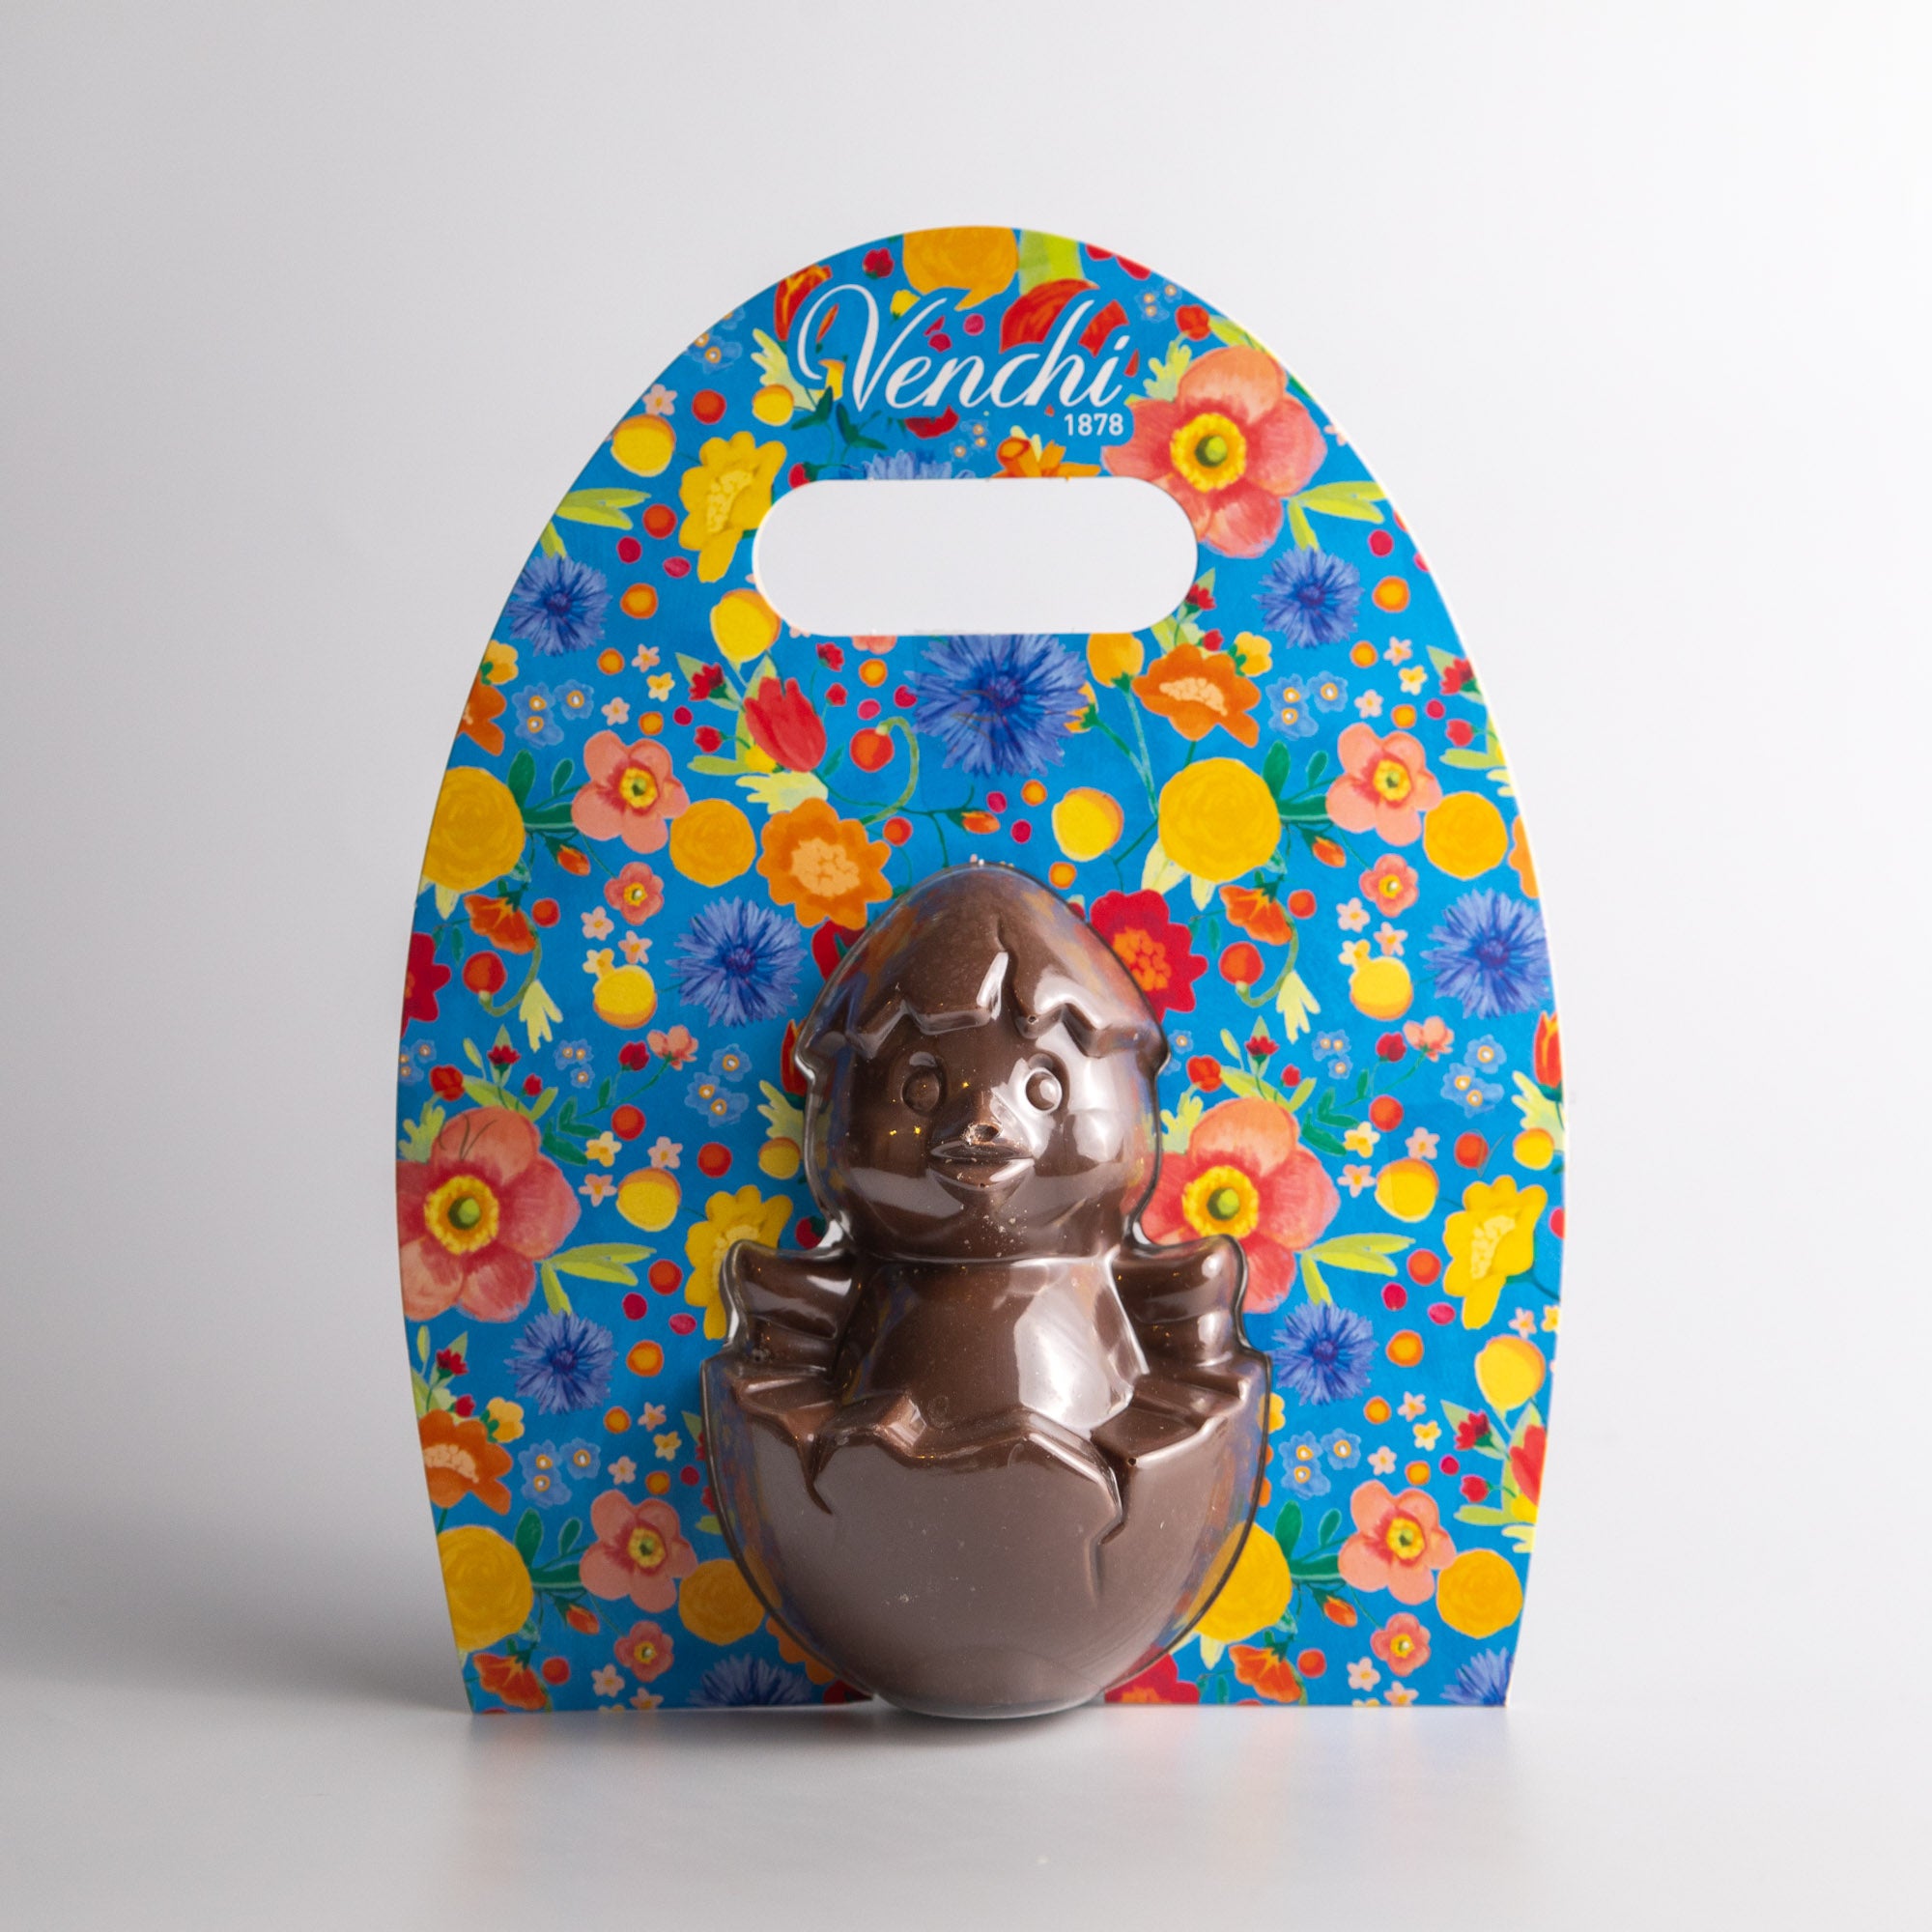 Venchi Chocolate Easter Chick